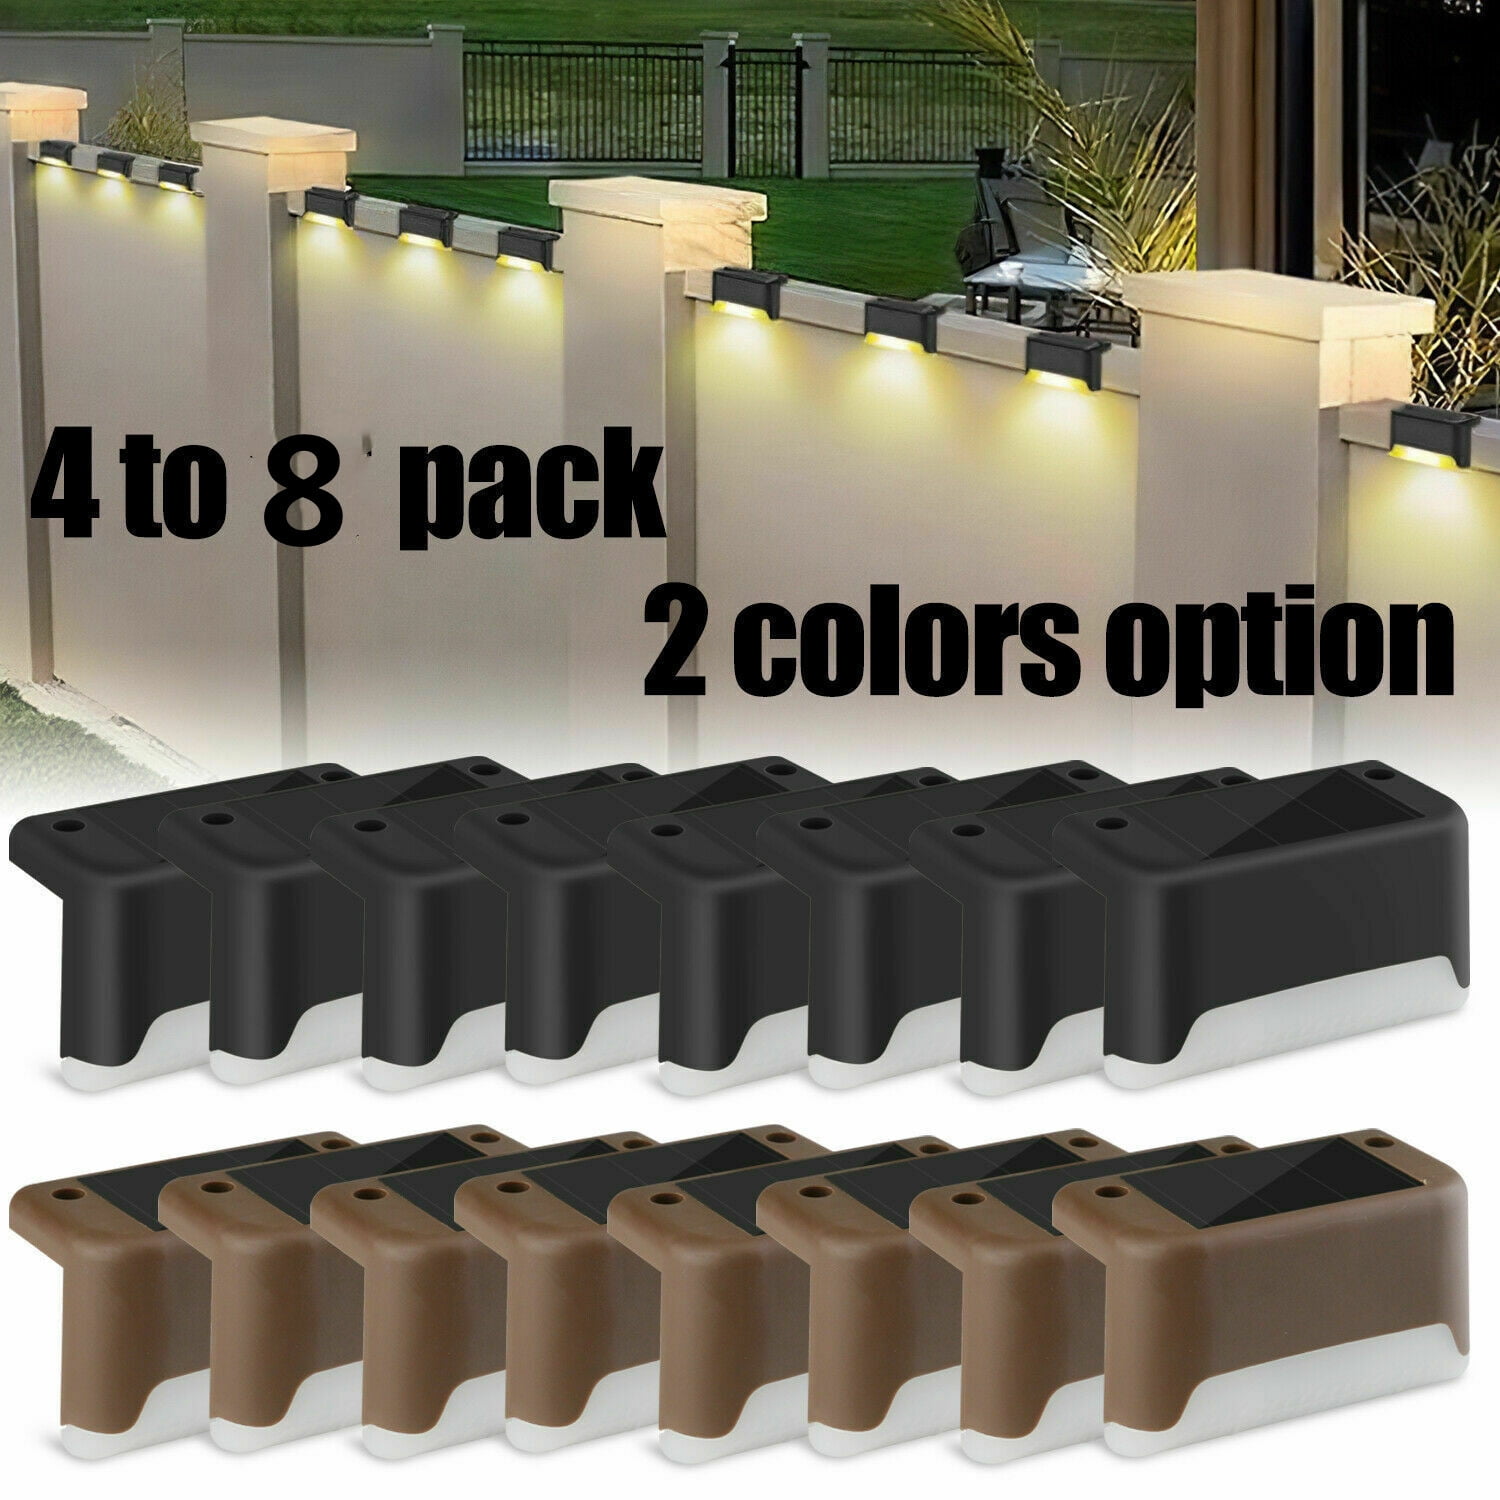 16Pcs Outdoor Lawn Power Deck Light LED Garden Yard Patio Stair Step Fence Lamp 